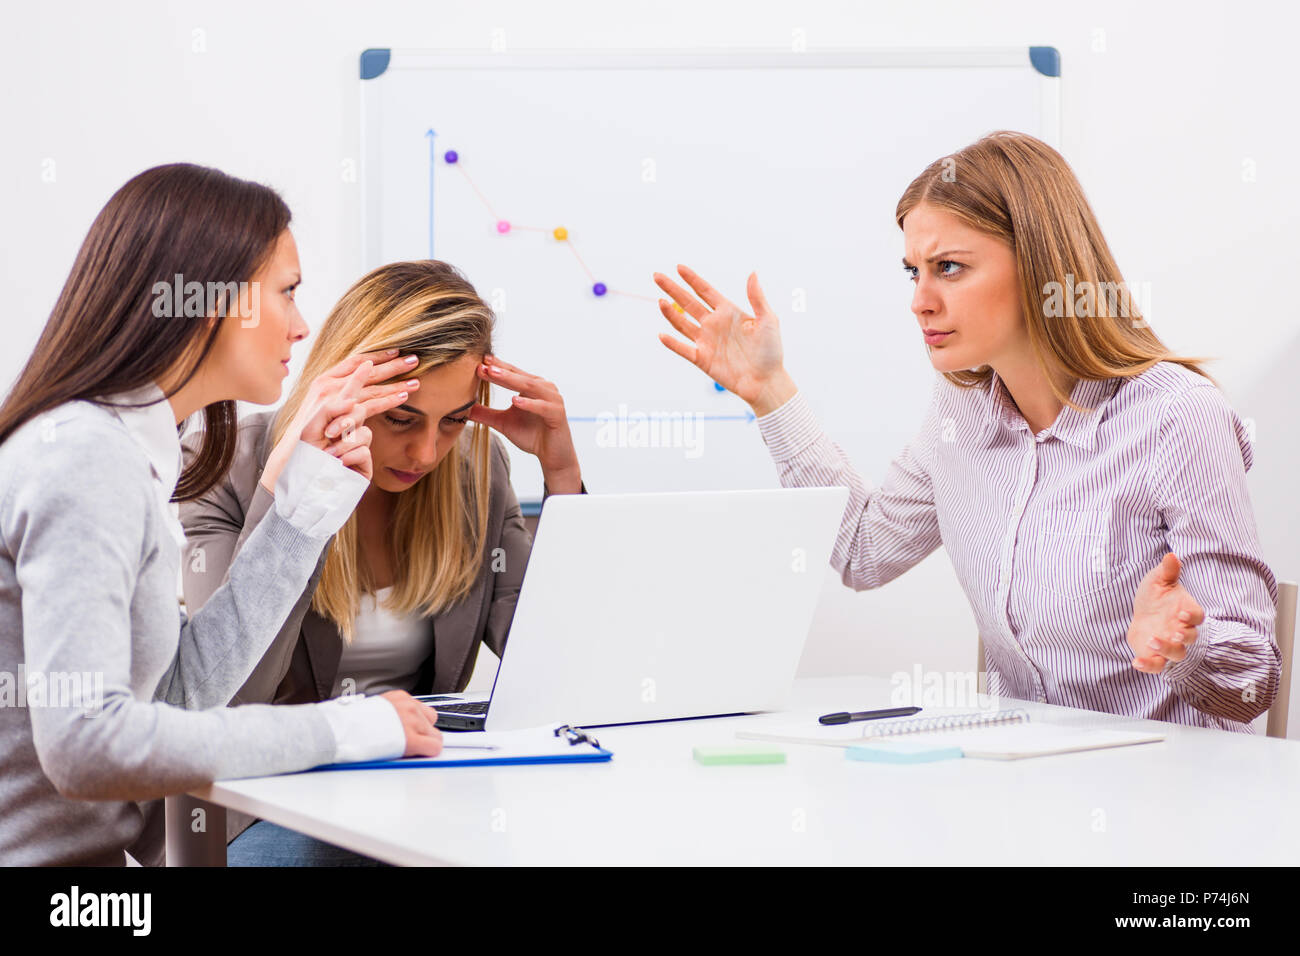 Three businesswomen are arguing at meeting in their office. Stock Photo